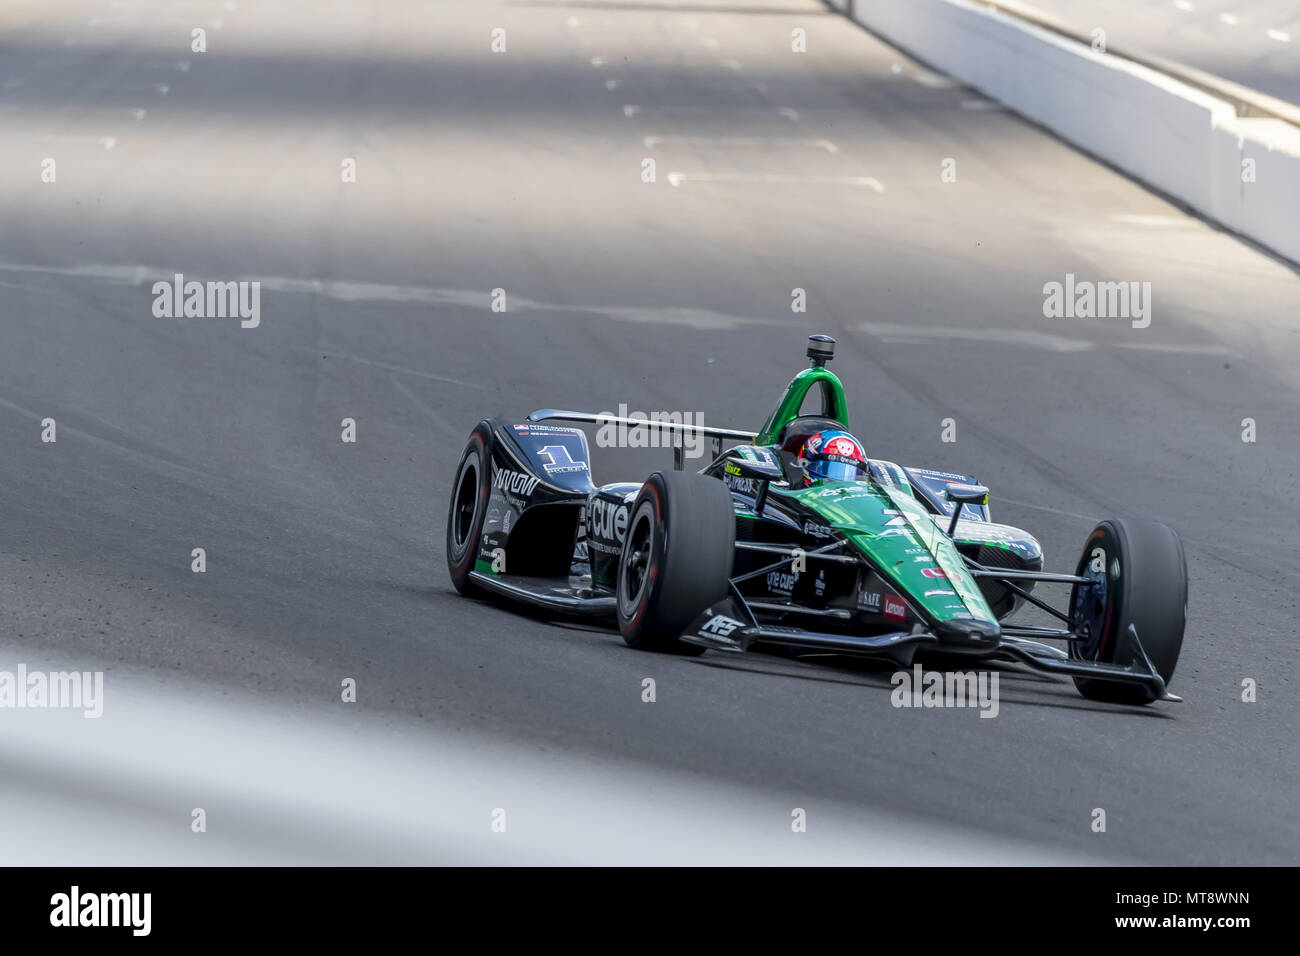 May 27, 2018 - Indianapolis, Indiana, United States of America - Jay HOWARD (7) of England  brings his car down the frontstretch during the Indianapolis 500 at Indianapolis Motor Speedway in Indianapolis Indiana. (Credit Image: © Walter G Arce Sr Asp Inc/ASP via ZUMA Wire) Stock Photo